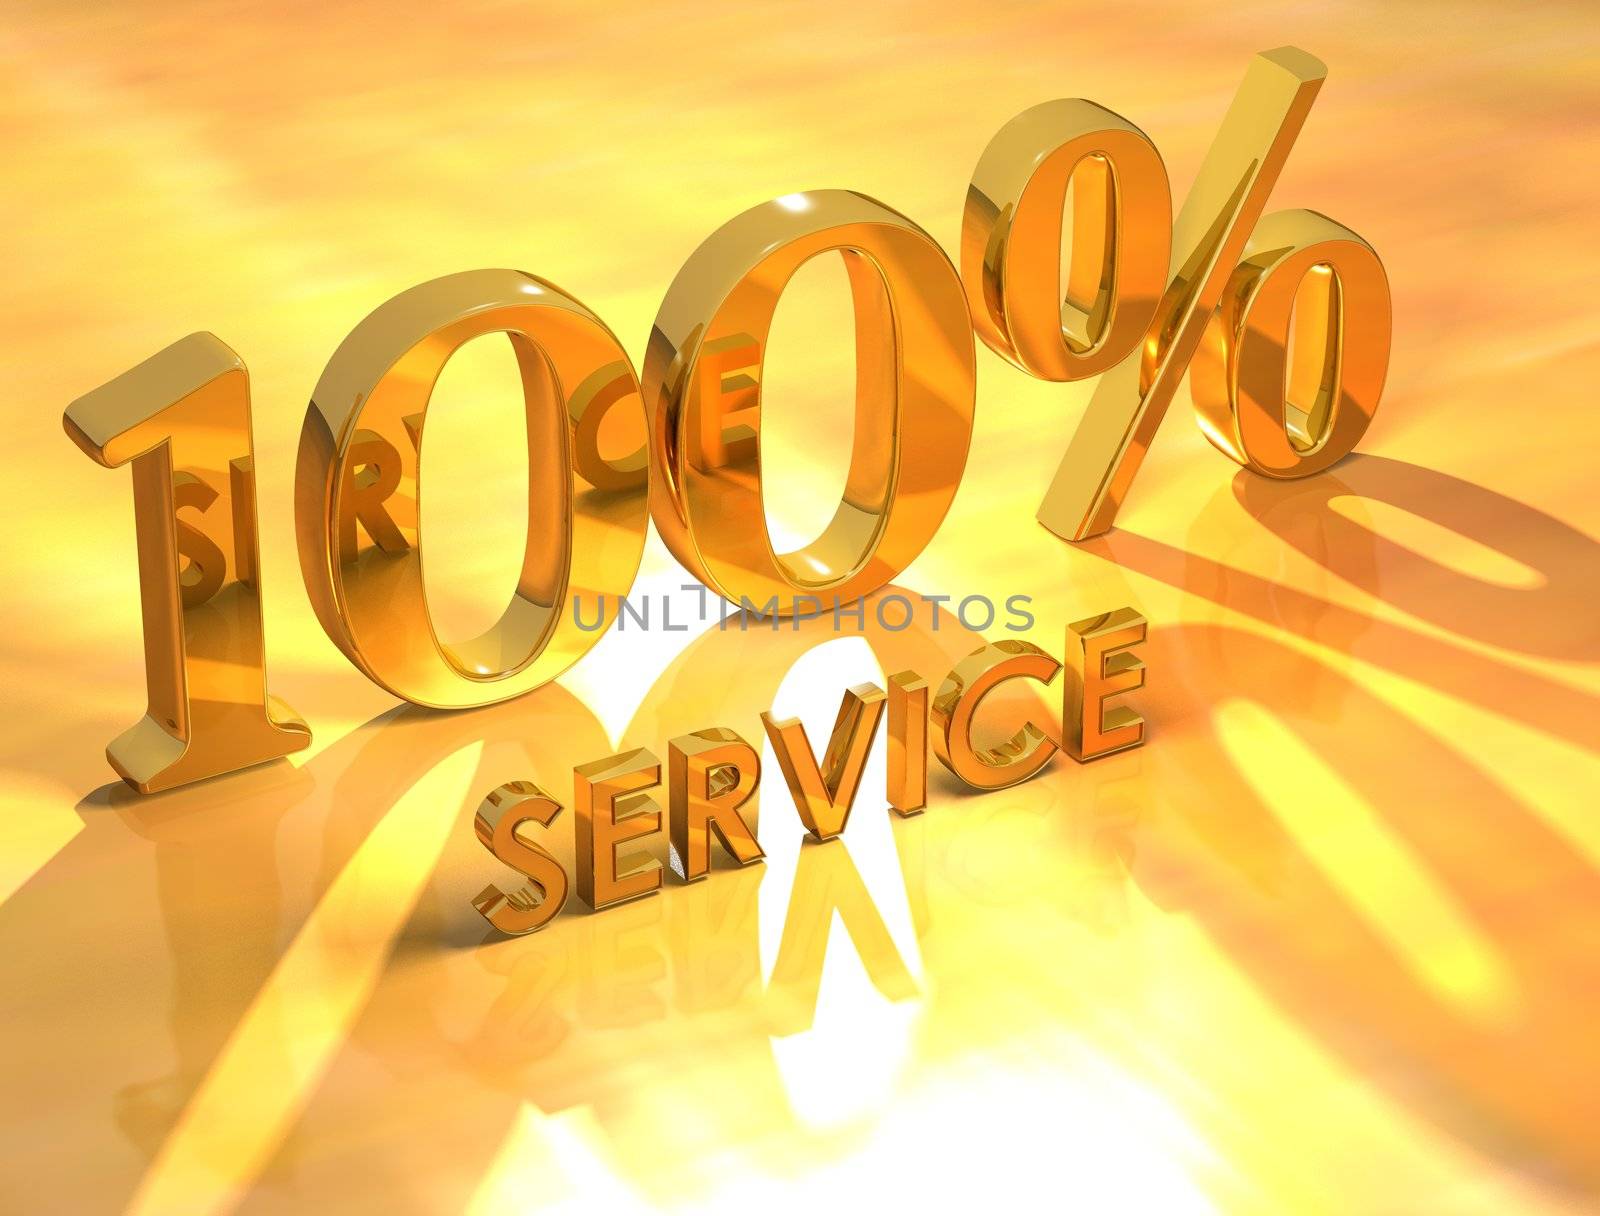 3D 100 % Service on yellow background